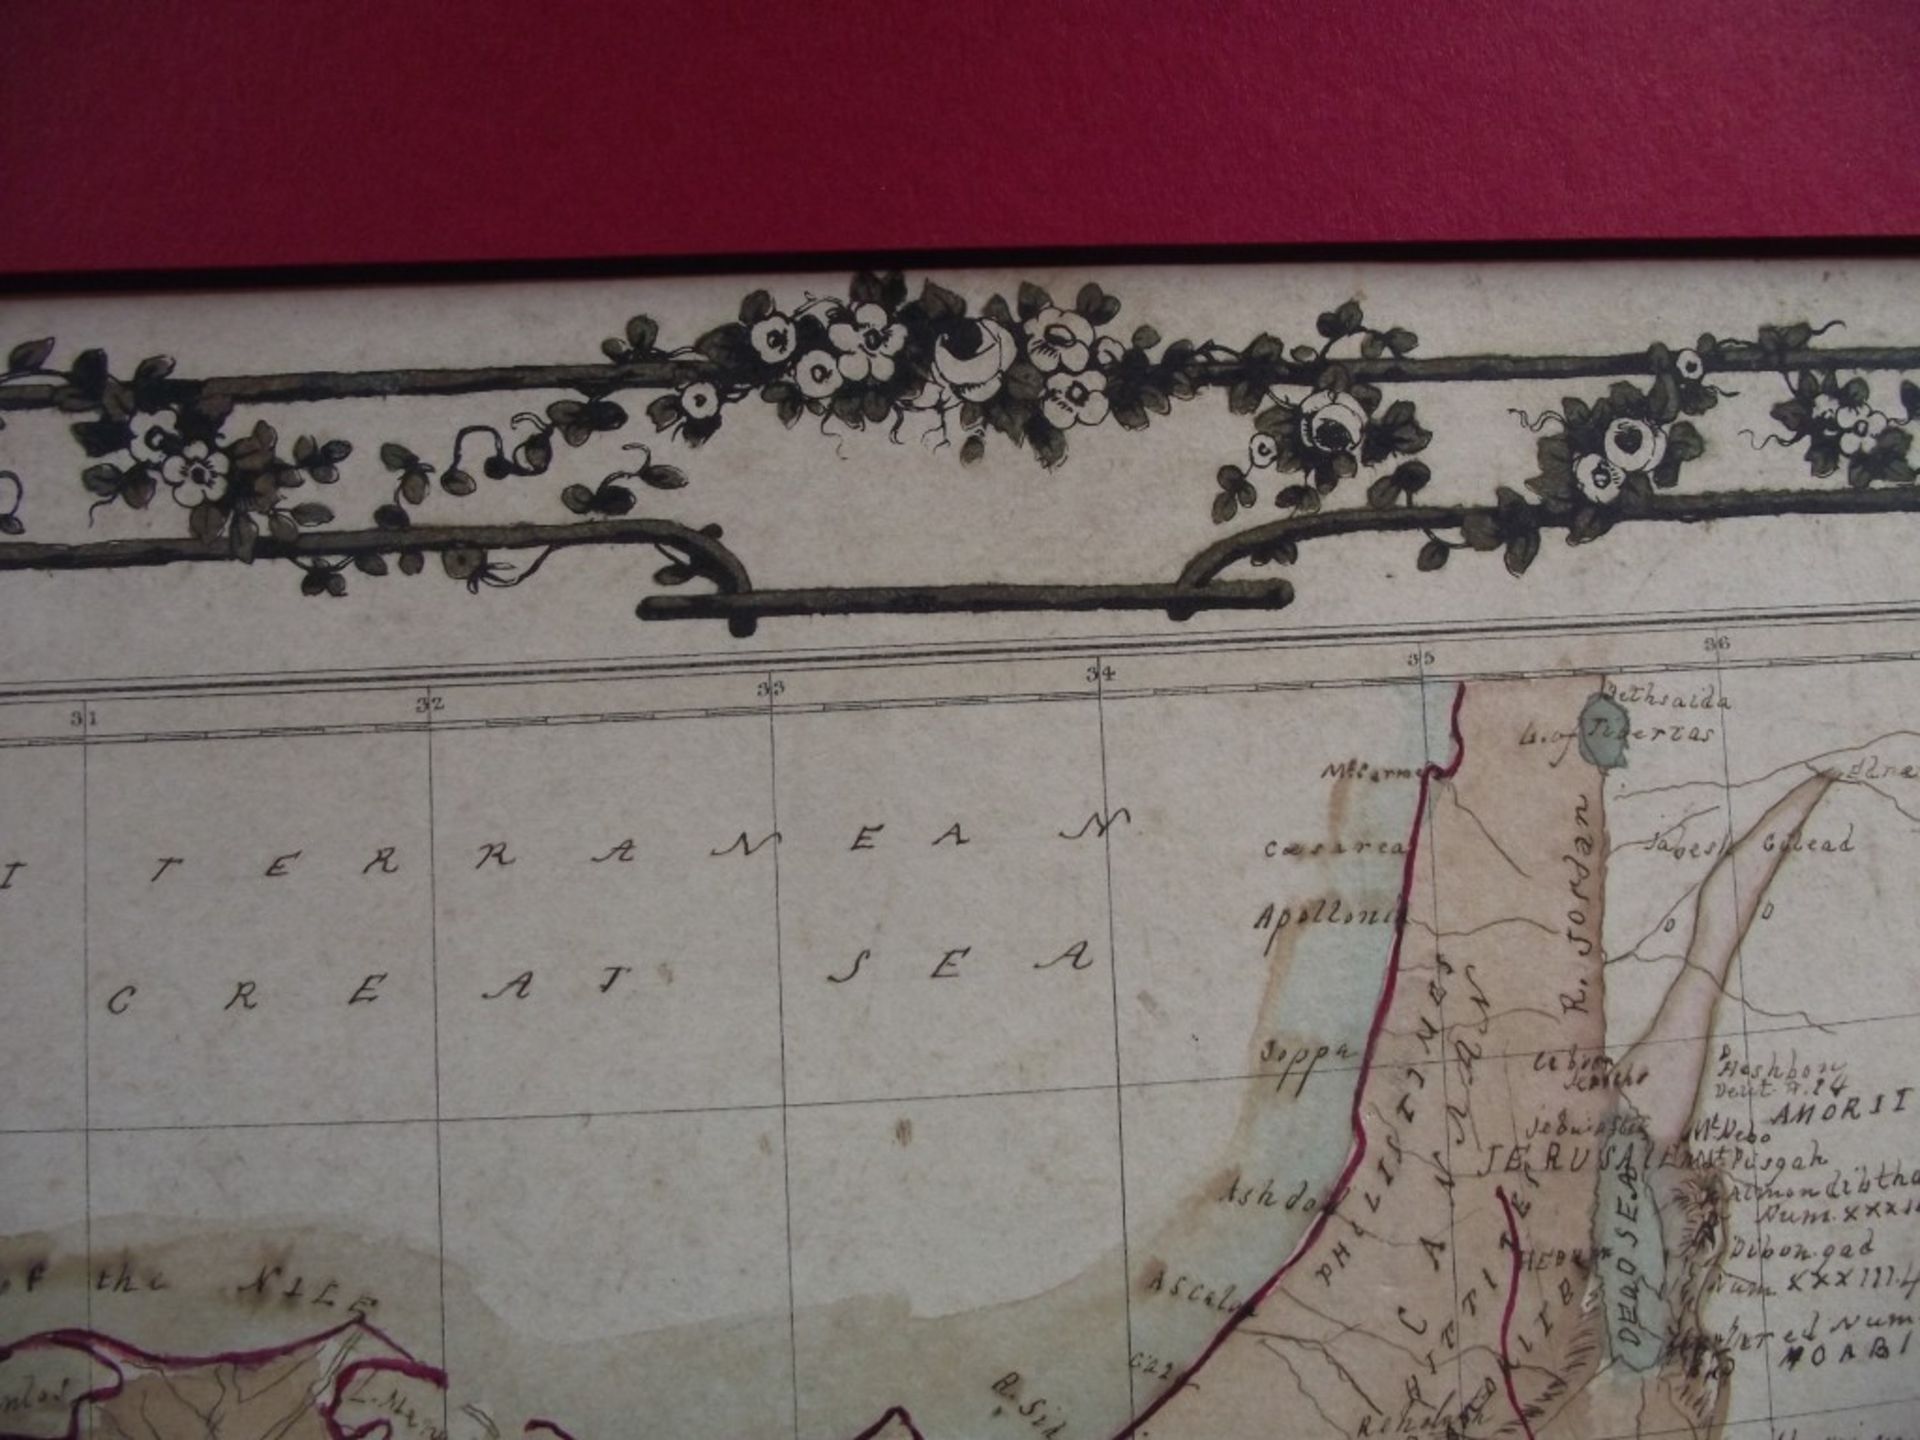 2 x 19th Century Hand Drawn Maps - Signed & Dated By Jane Edwards 1860 - Image 23 of 34